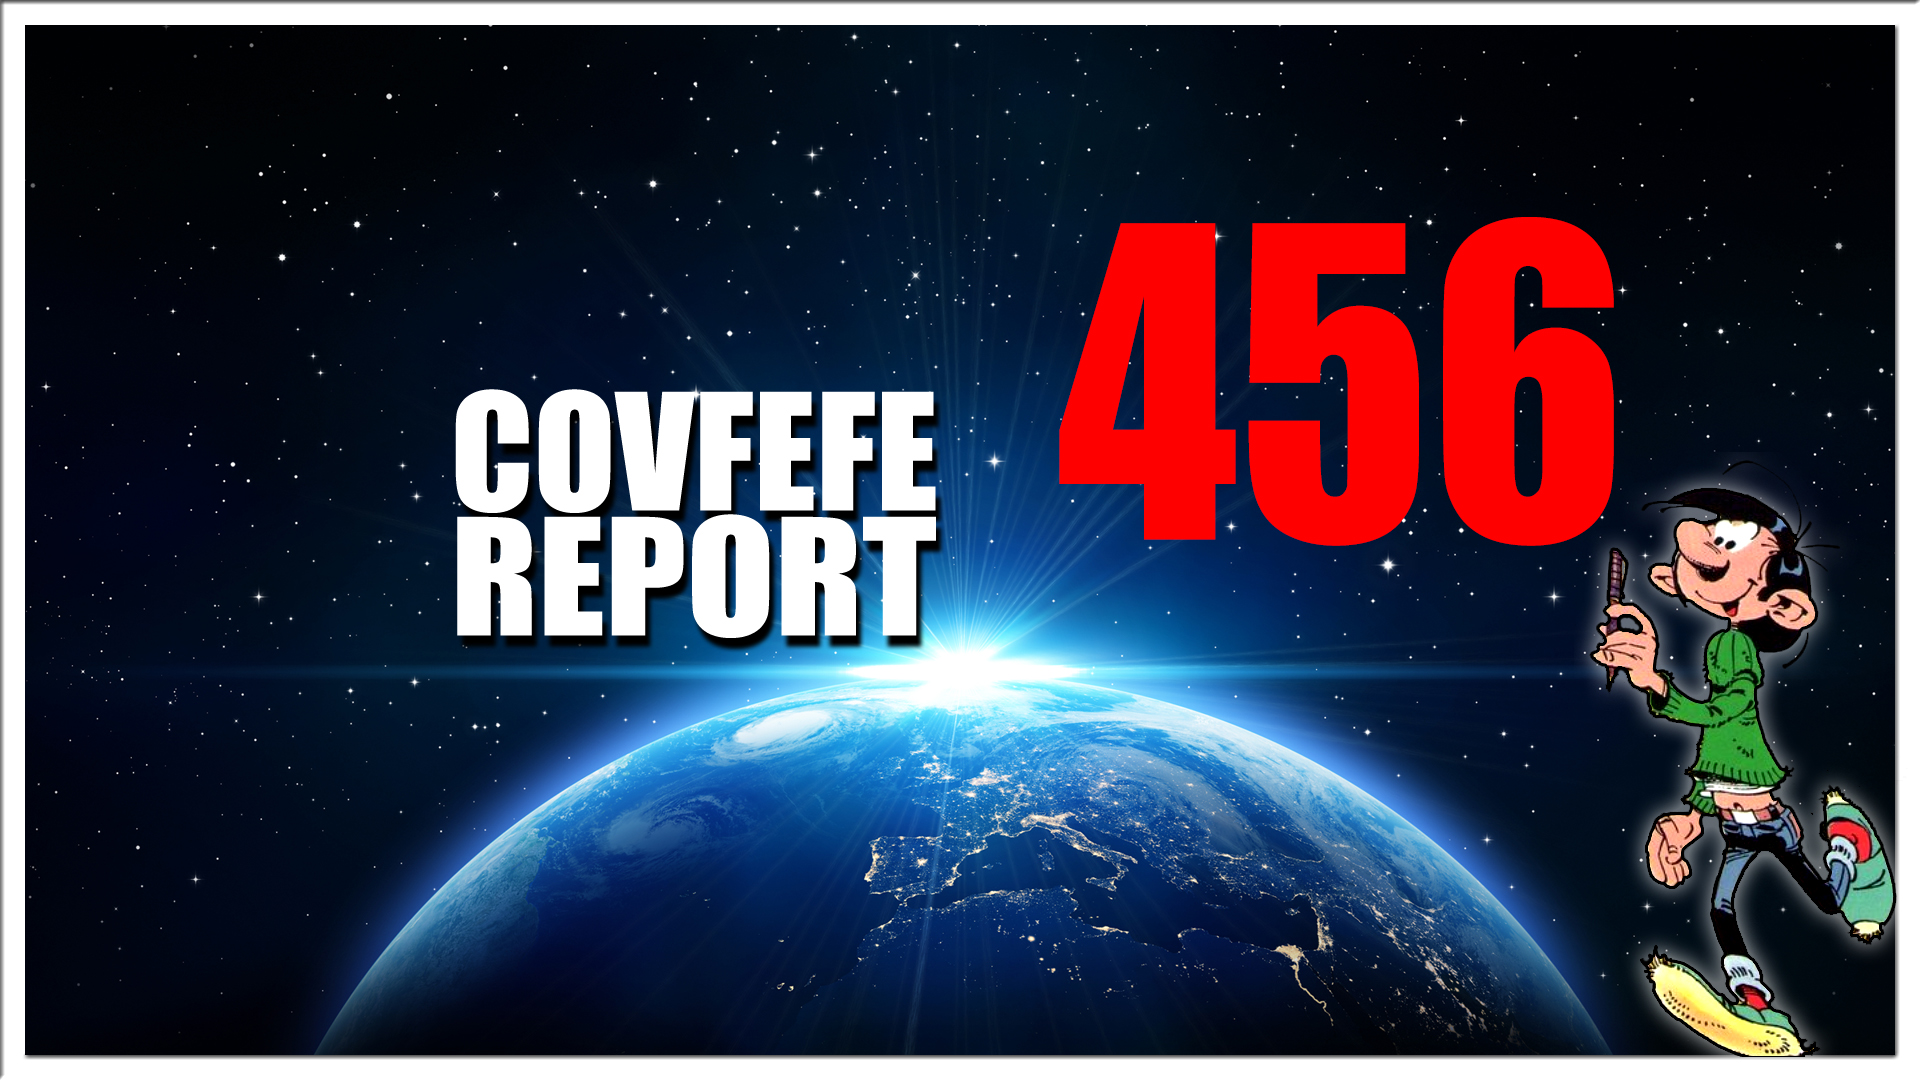 Covfefe Report 456. He's coming back, Wappies tonen respect, Thierry Baudet, TG-reacties